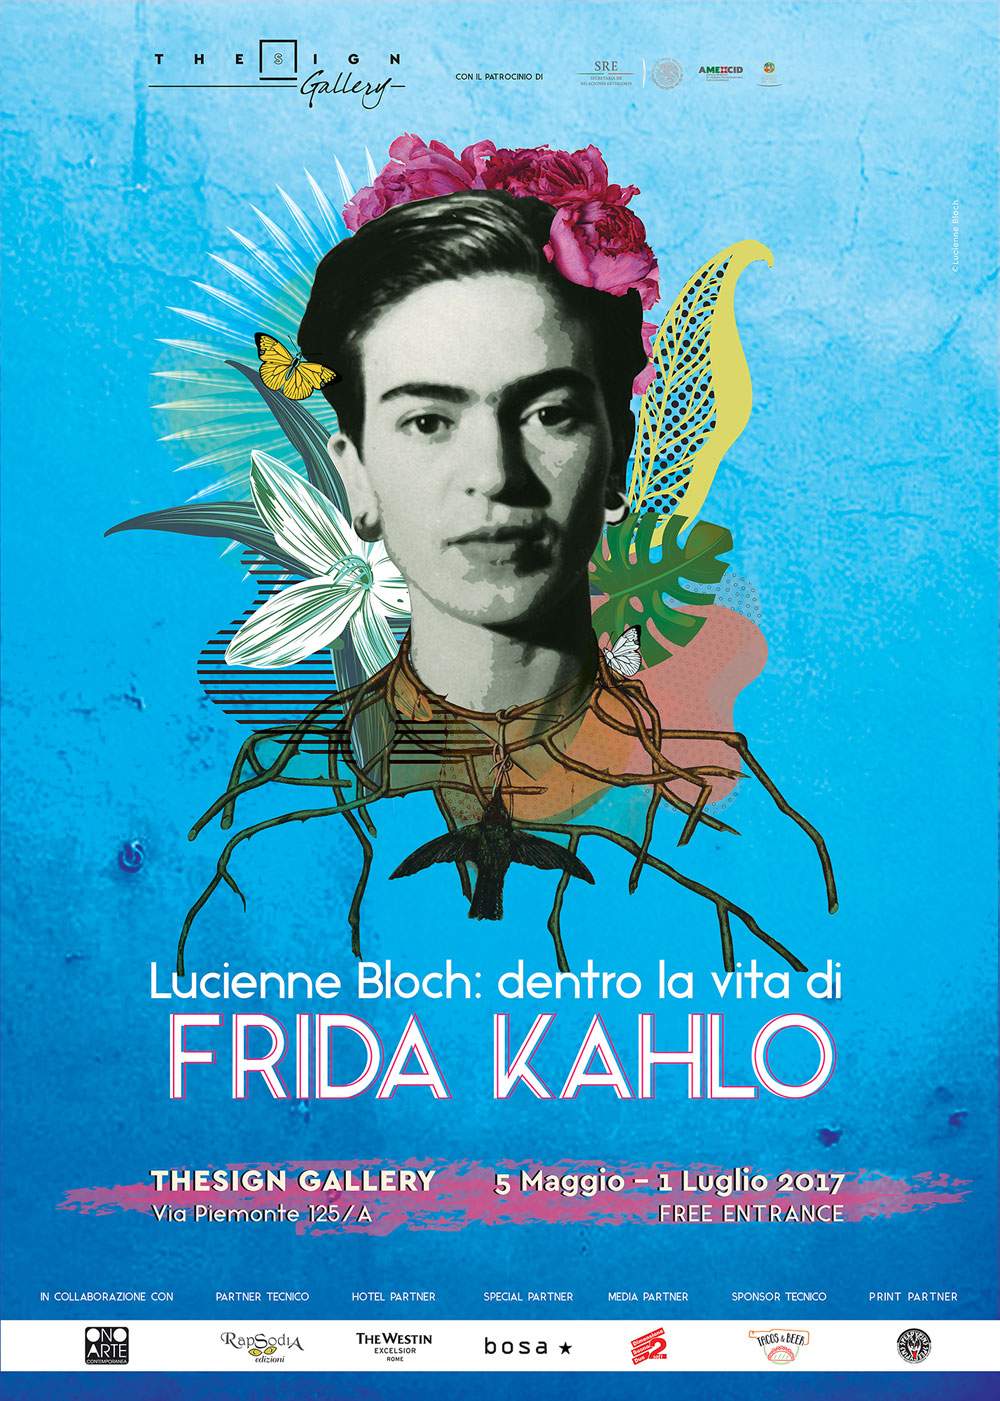 At Thesign Gallery in Rome, a photography exhibition dedicated to Frida Kahlo